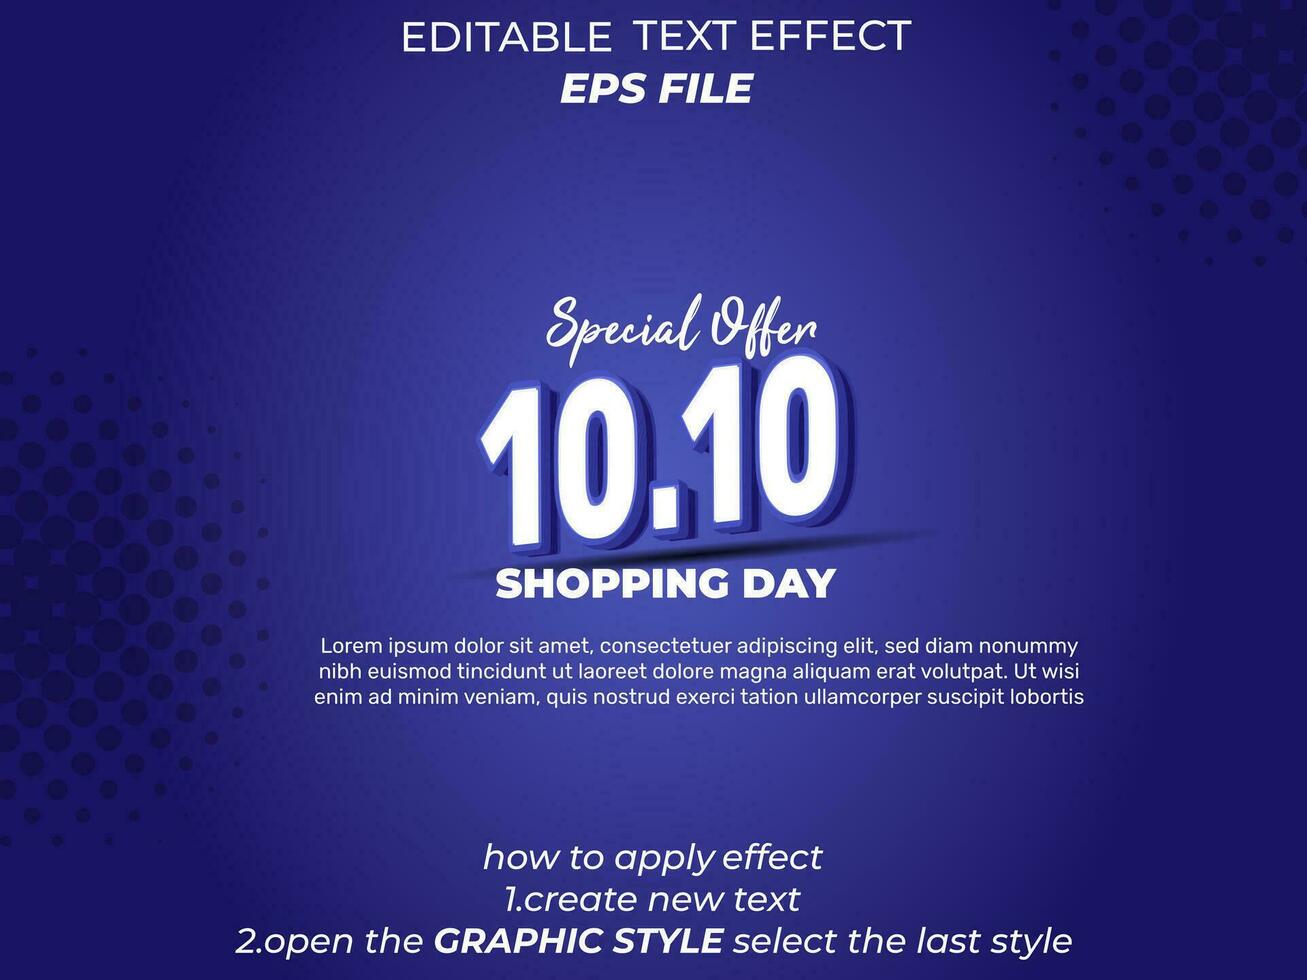 10.10 shopping day anniversary text effect, 3d text, editable for commercial promotion vector